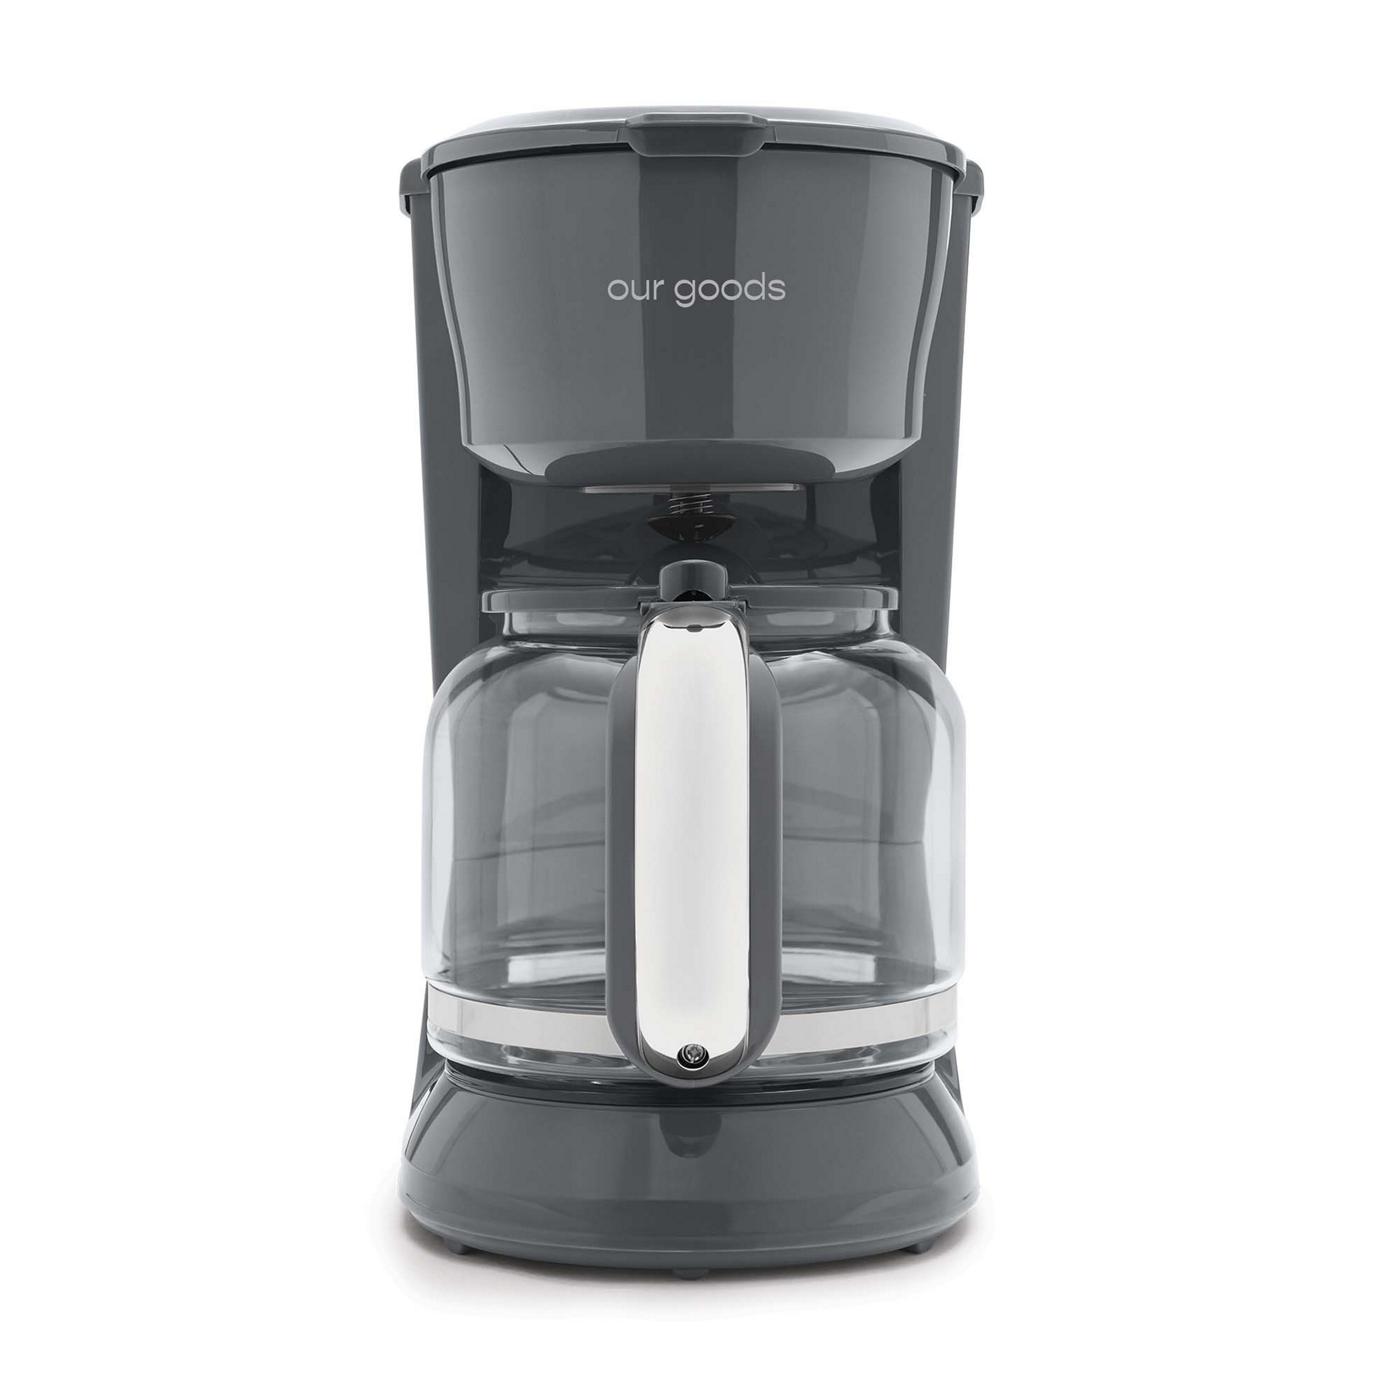 our goods Coffee Maker - Pebble Gray; image 1 of 3